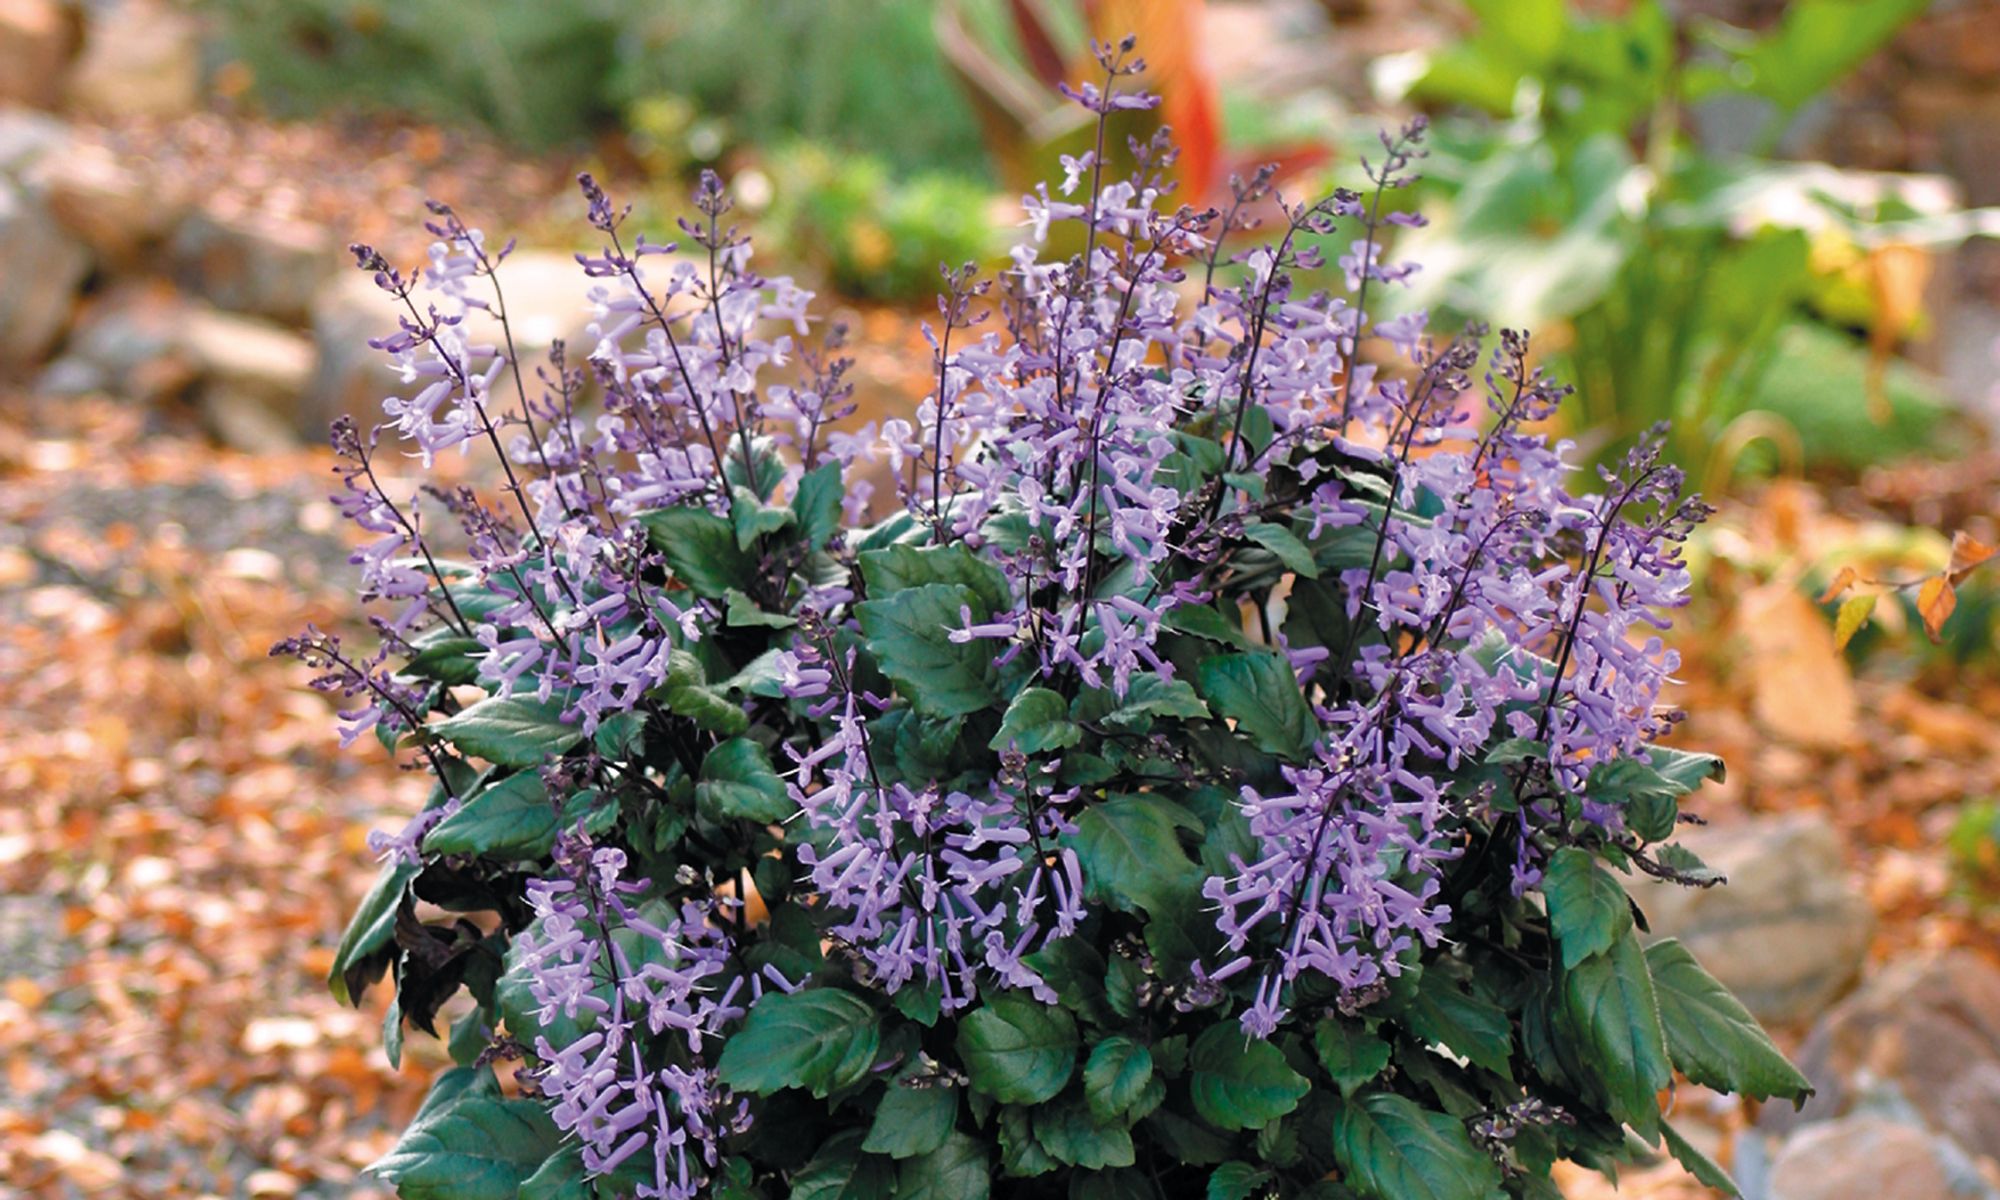 How to Grow and Care for 'Mona Lavender' Plectranthus